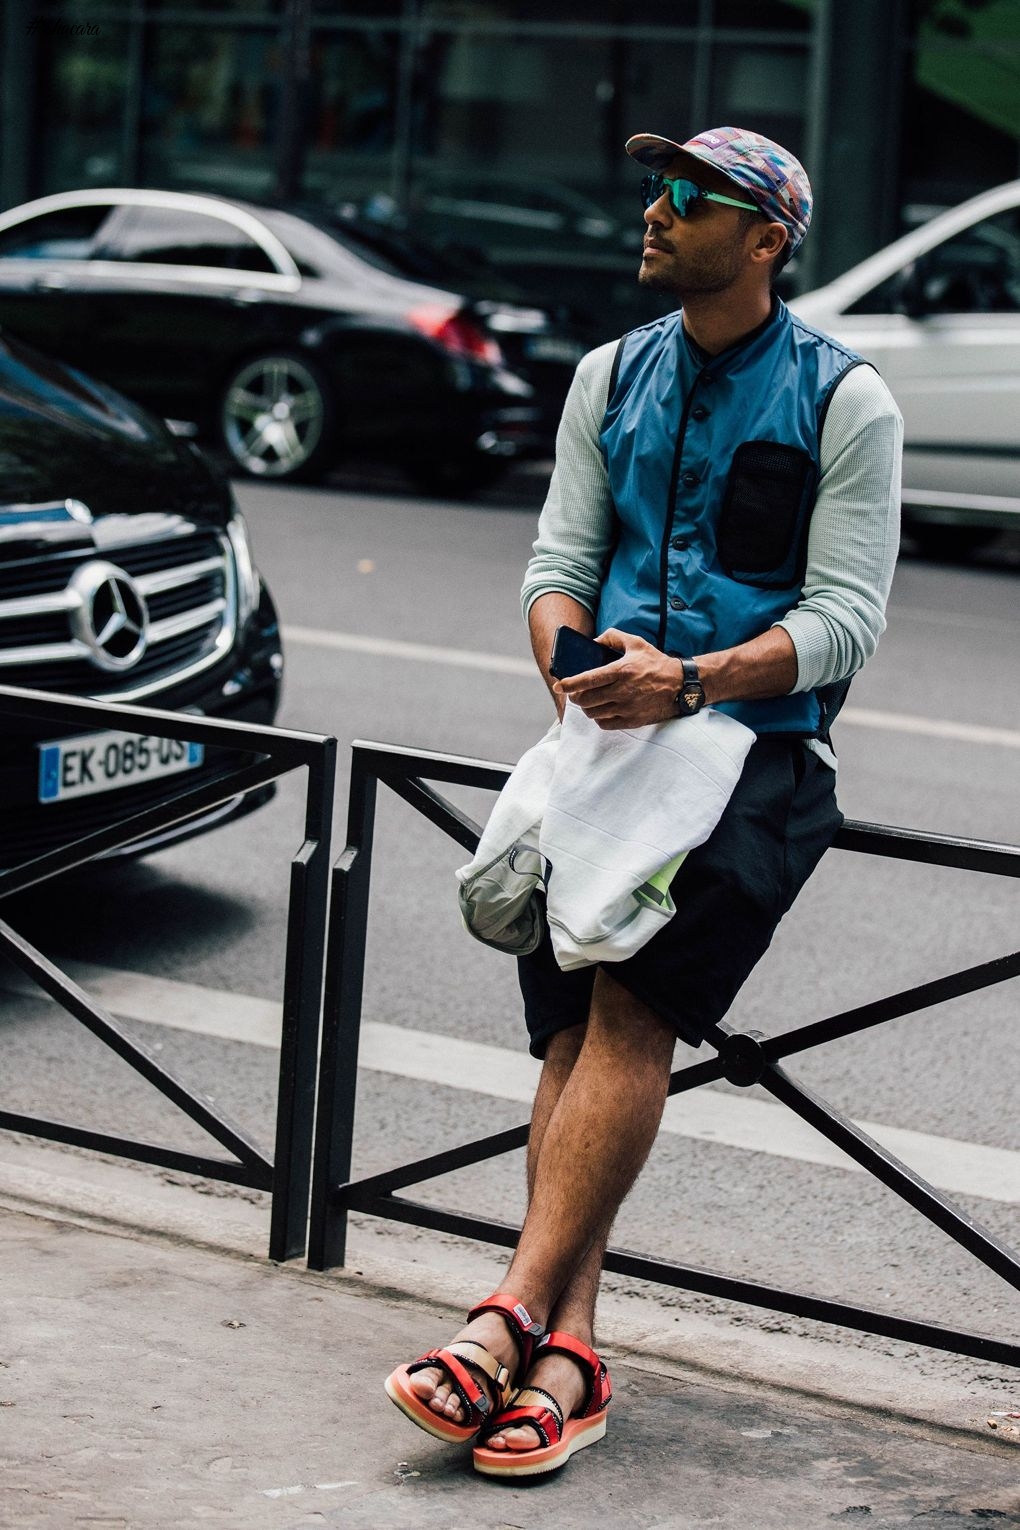 Bubbly & Colorful! Here Are The Best Street Style Looks From Paris Men’s Fashion Week